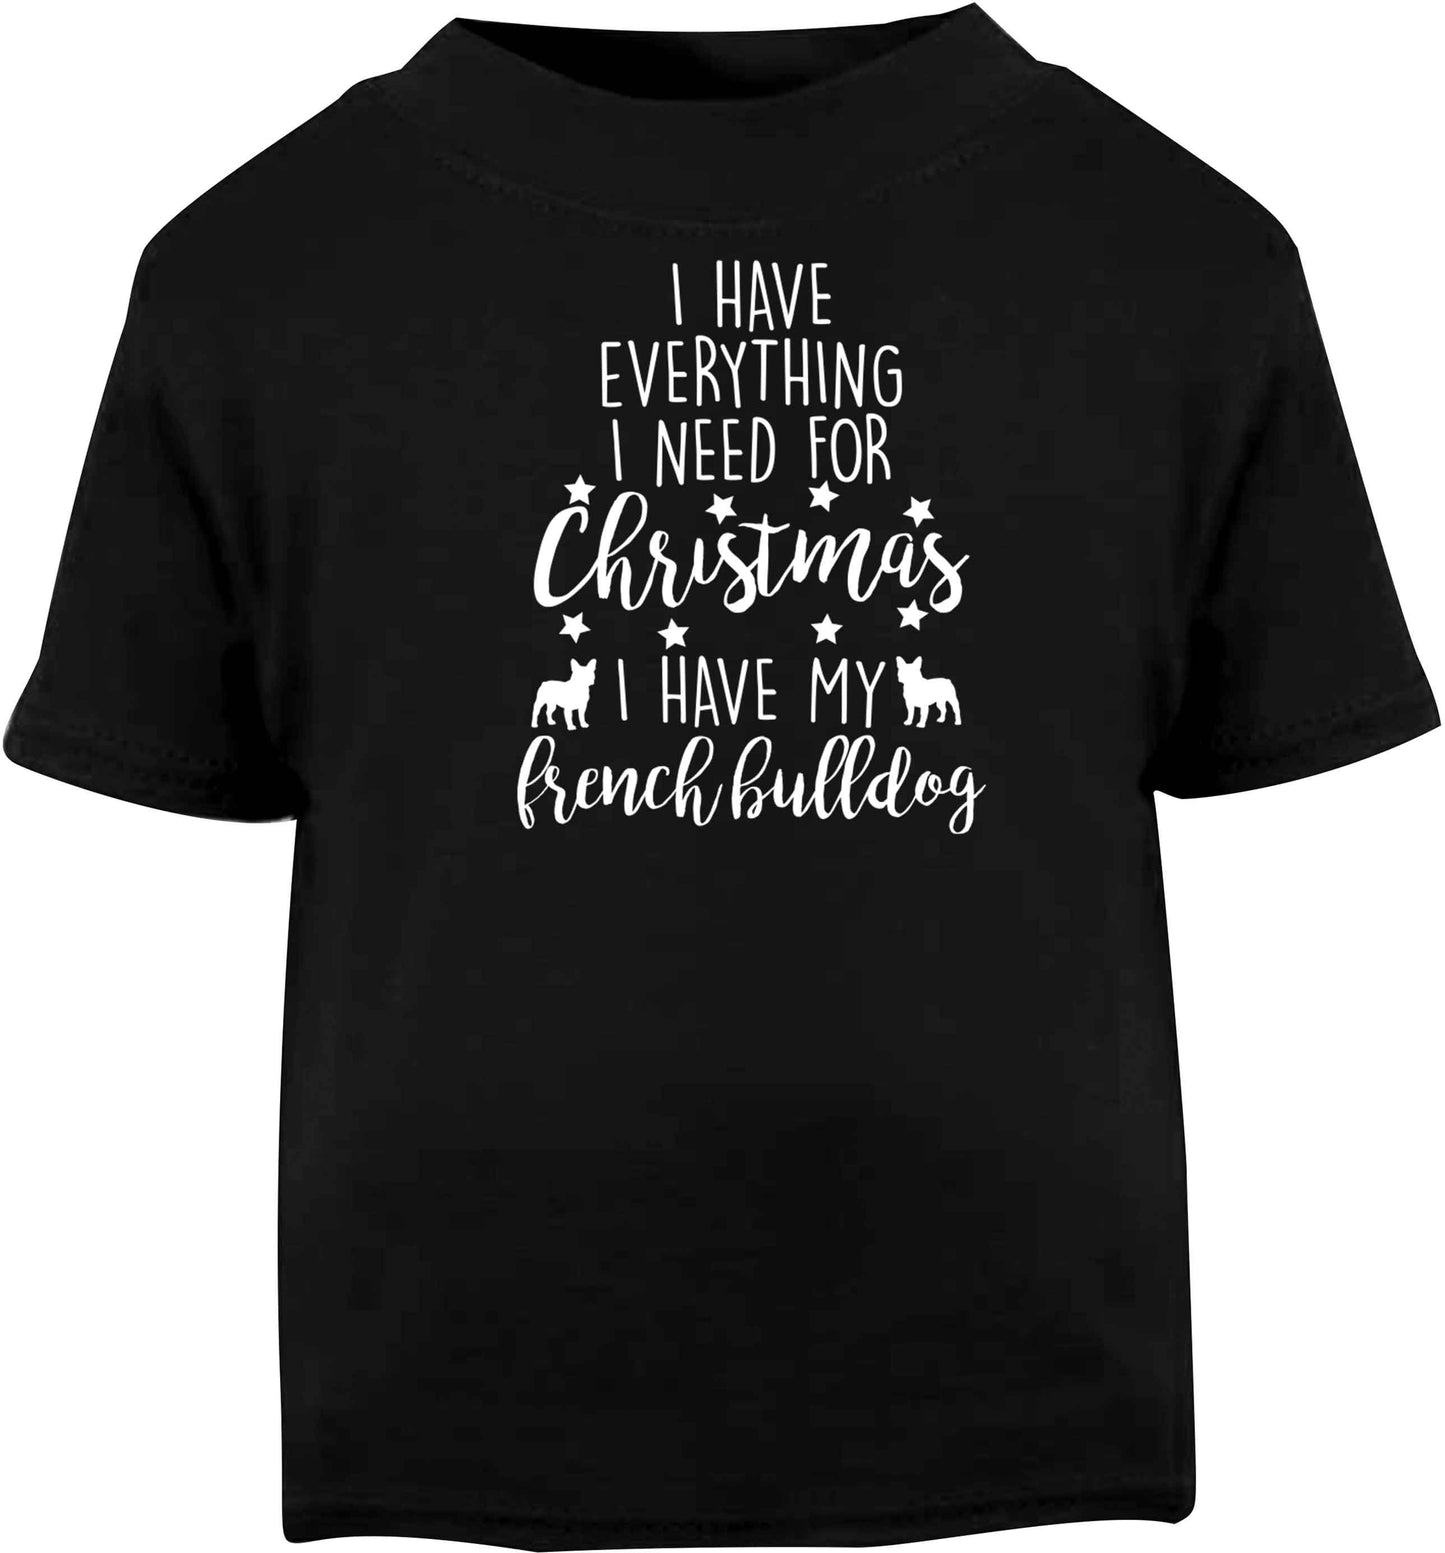 I have everything I need for Christmas I have my french bulldog Black baby toddler Tshirt 2 years